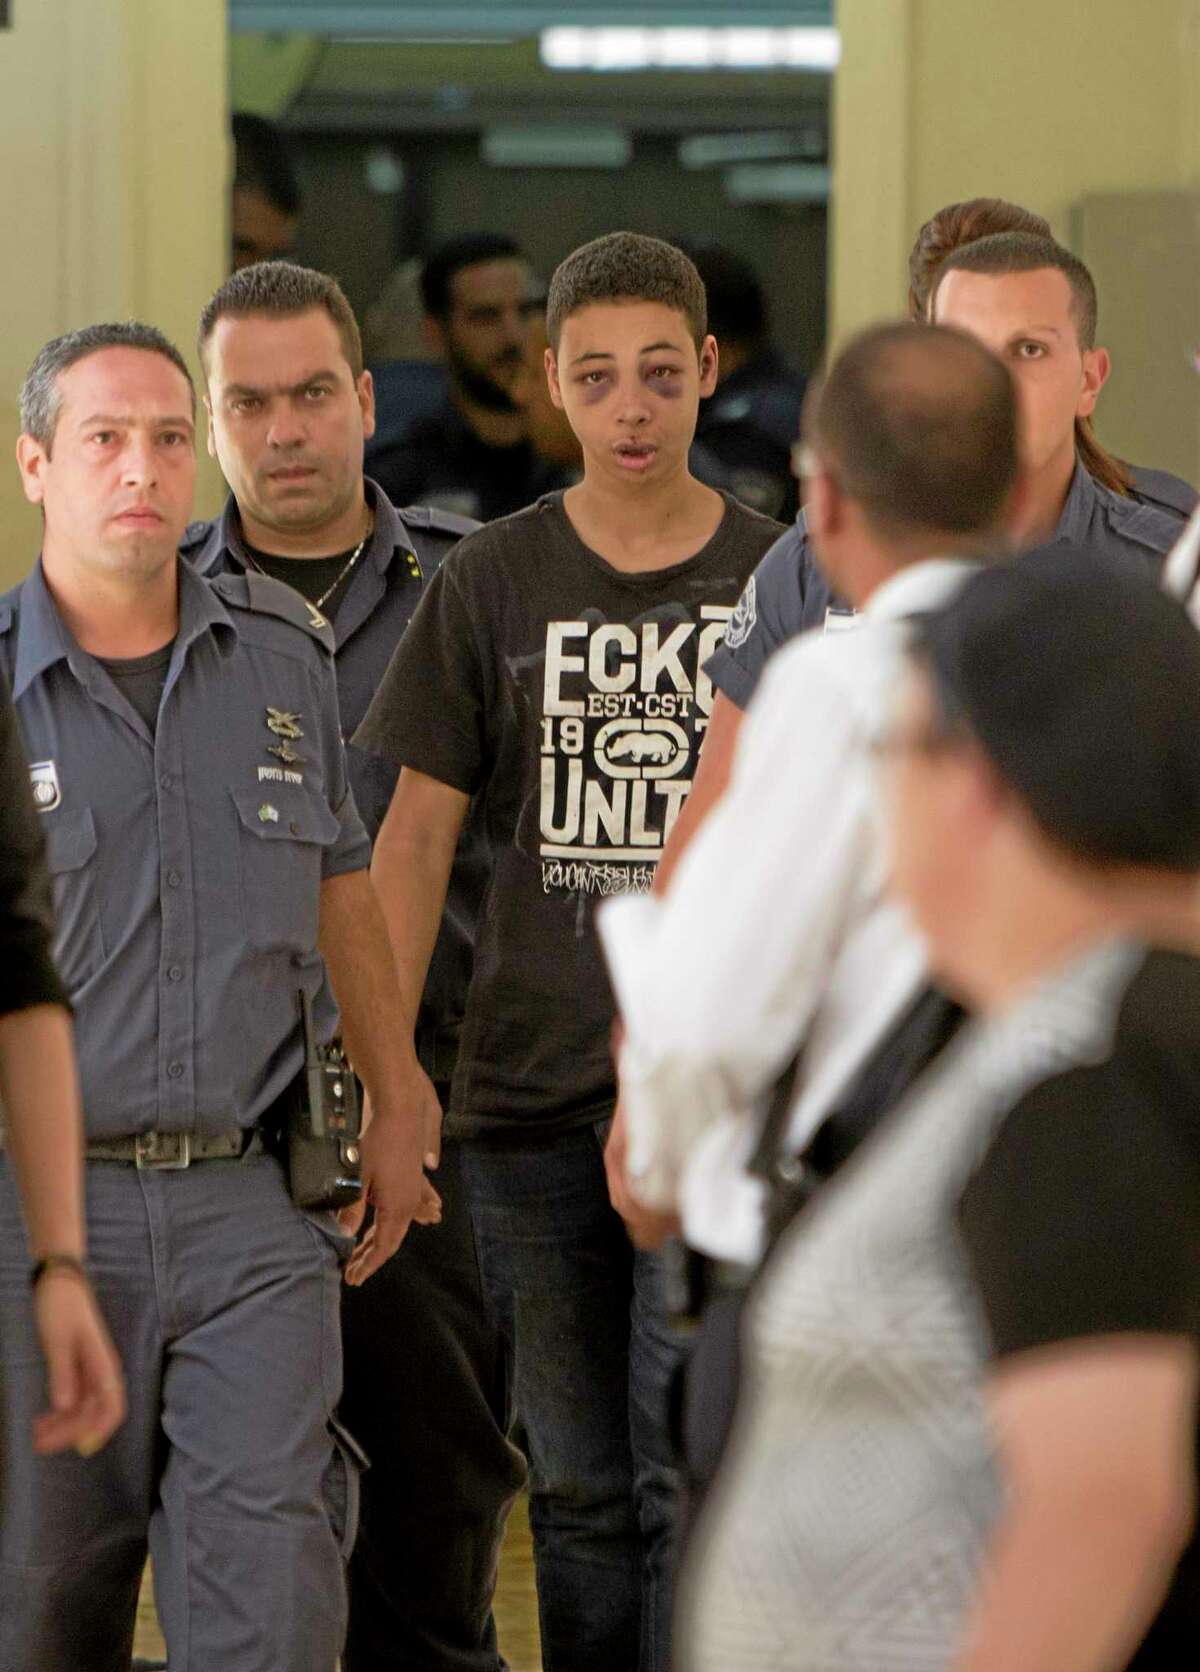 Tariq Abu Khdeir, 15, a Palestinian-American who relatives say was beaten and arrested by Israeli police during clashes sparked by the killing Thursday of his cousin Mohammed Abu Khdeir, is escorted by Israeli prison guards during an appearance at Jerusalem magistrate's court Sunday, July 6, 2014. Israeli police said Tariq Abu Khdeir resisted arrest, attacked officers and was carrying a slingshot for lobbing stones when he was arrested. He has been sentenced to nine days of house arrest. The U.S. State Department said it was "profoundly troubled" by reports of his beating and demanded an investigation. (AP Photo/Oded Balilty)